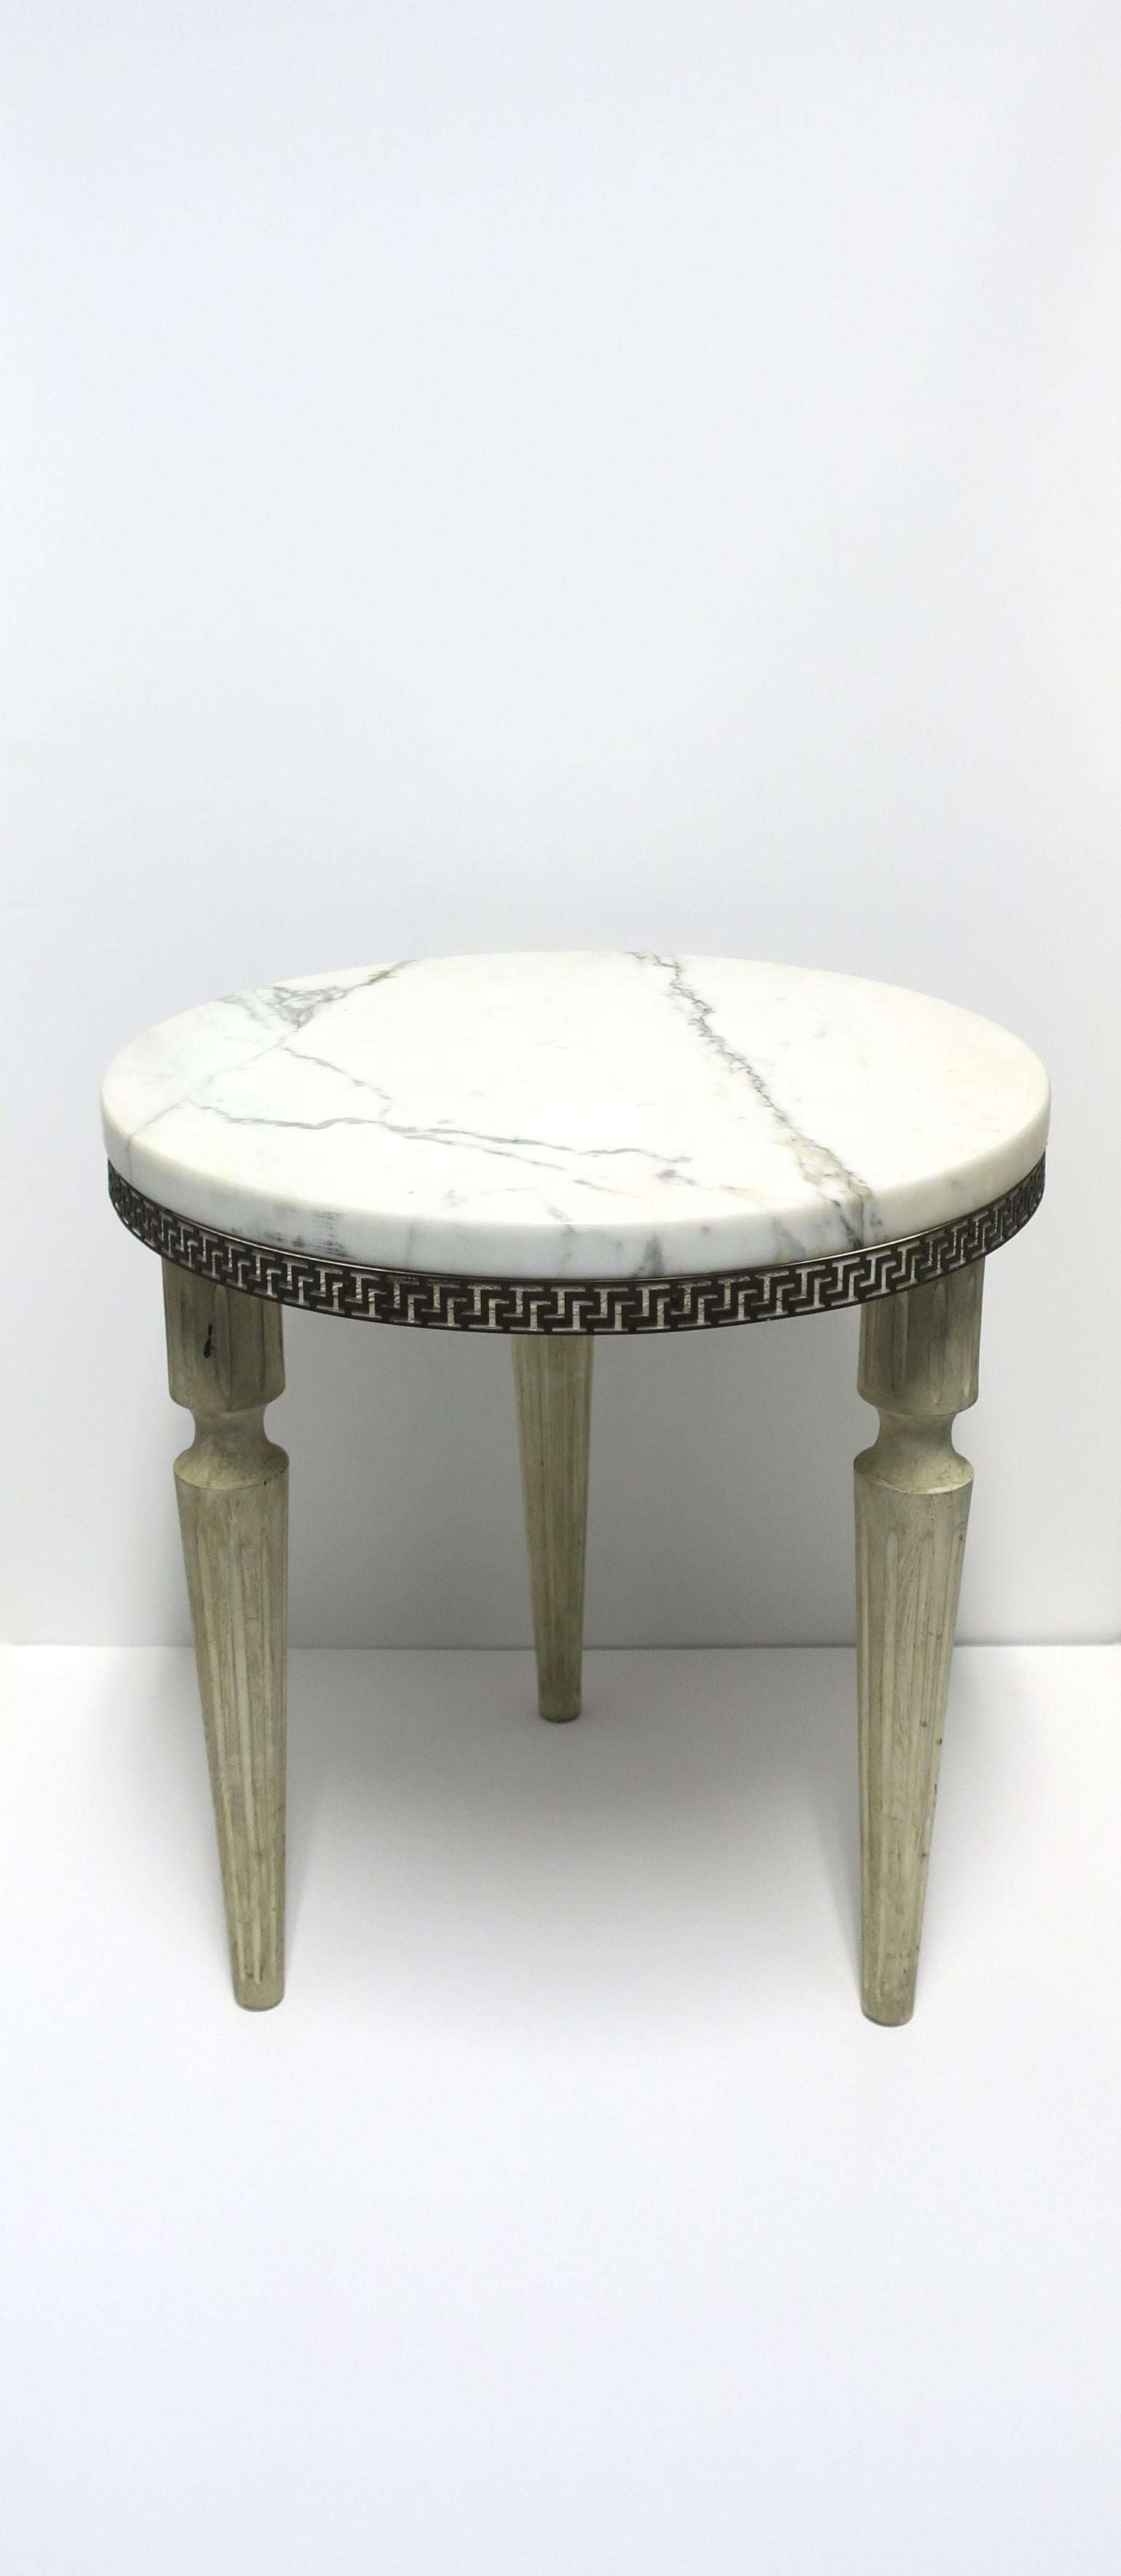 A white and dark veining marble side drinks table in the Neoclassical style, circa mid-20th century. Table is round with a substantial Carrara marble top, Greek-Key metal decorative edge, and fluted legs. Base is white wood with an antique finish on